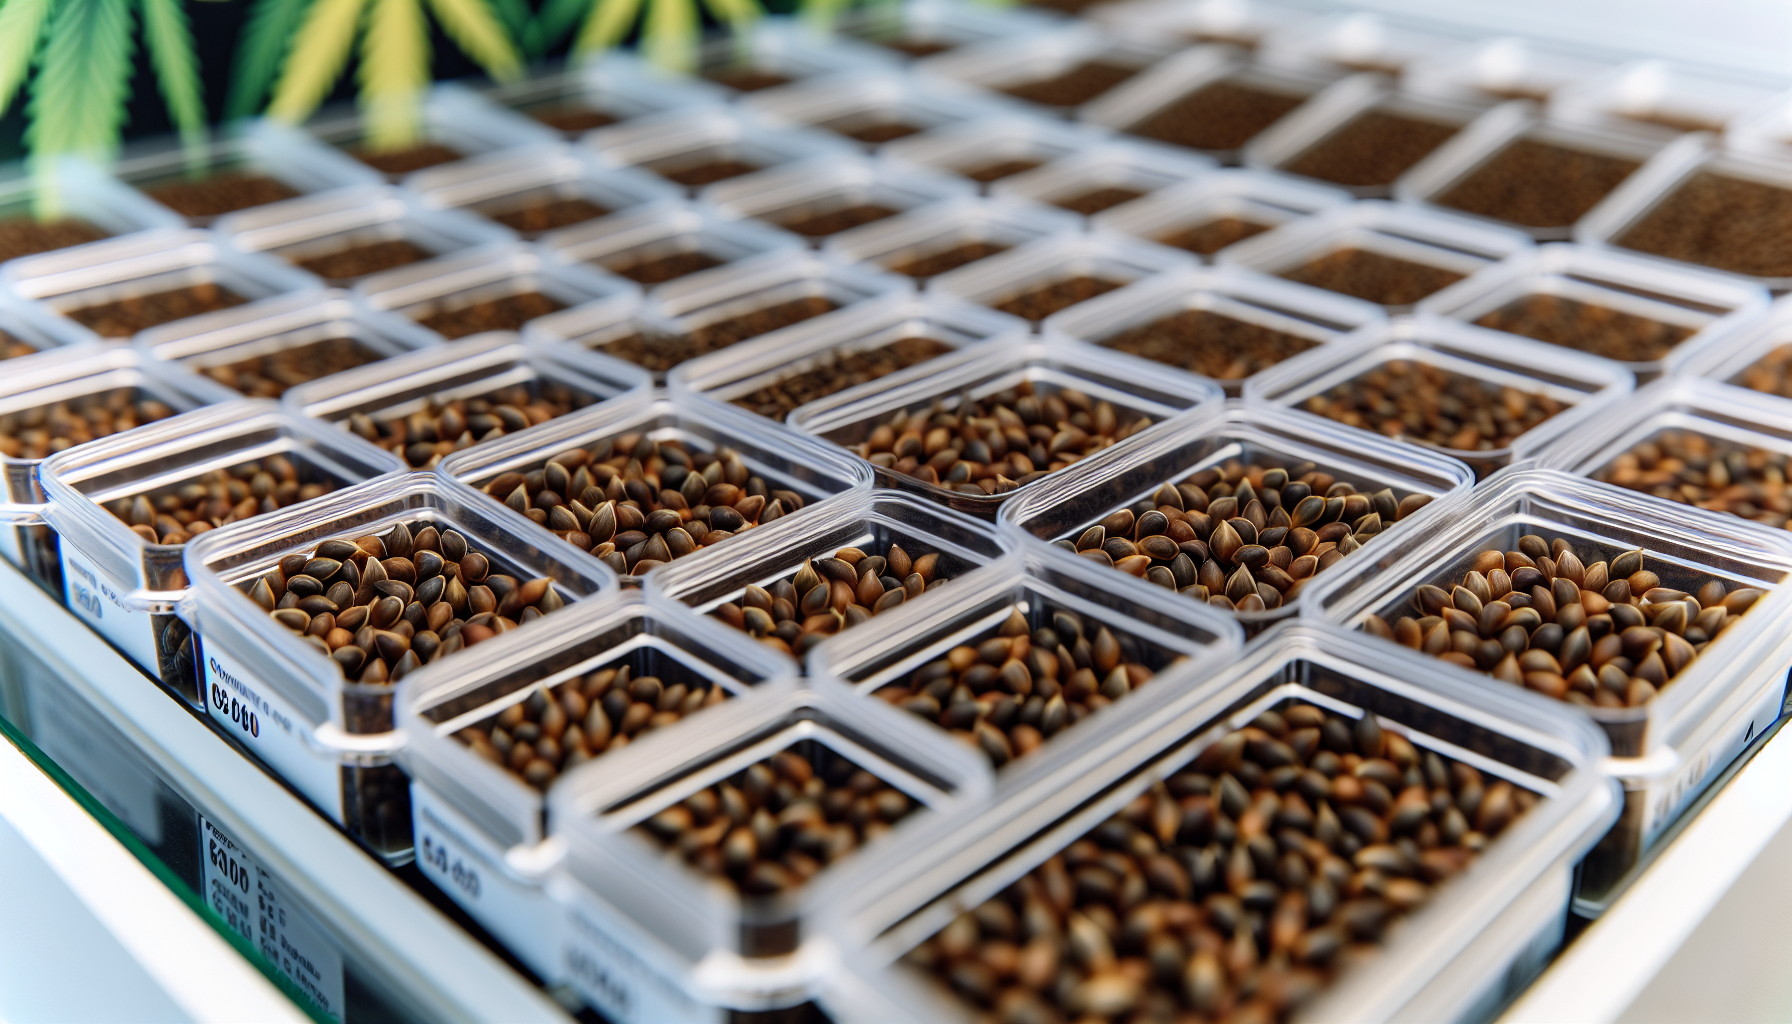 Northern Lights seeds in a seed bank